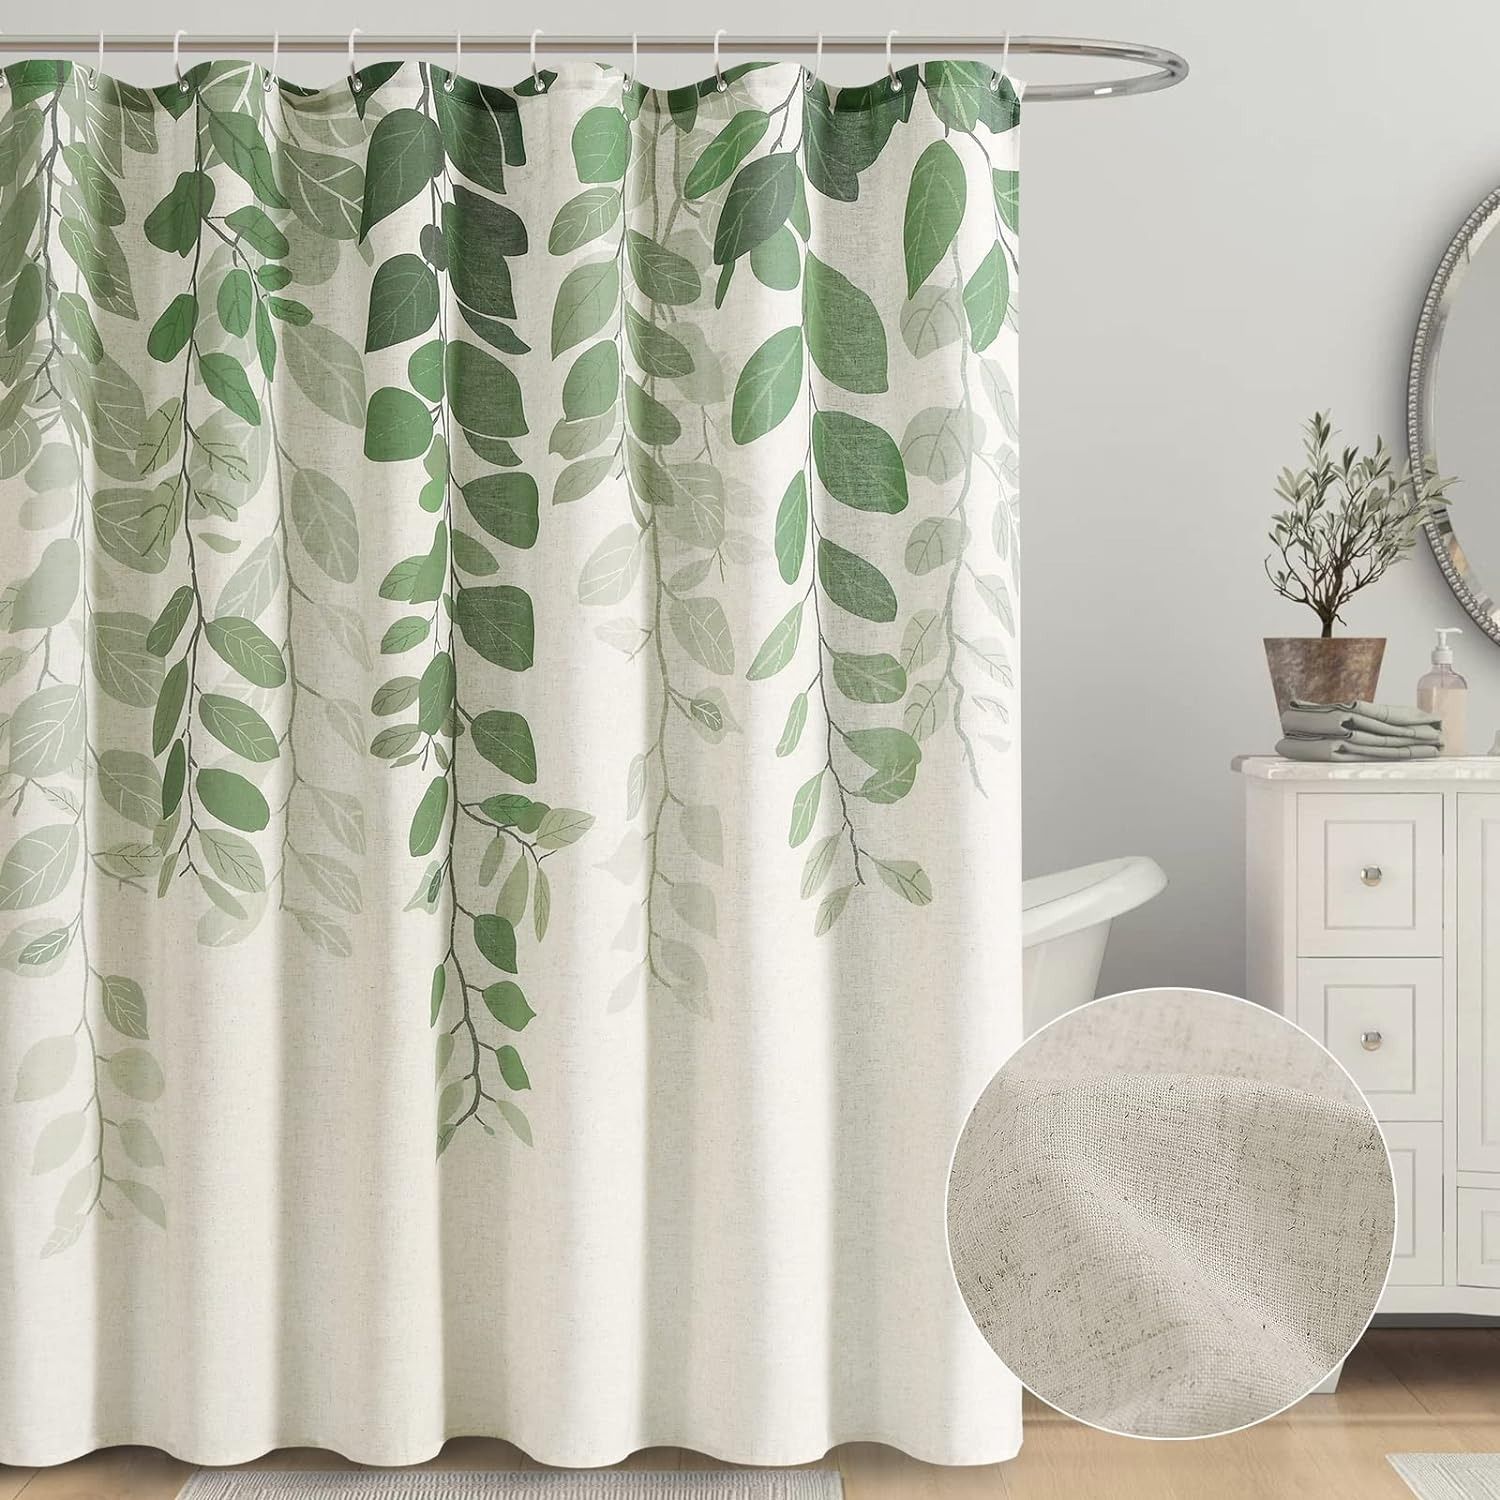 Complete Your Bathroom Look with Stylish Shower Curtain Sets